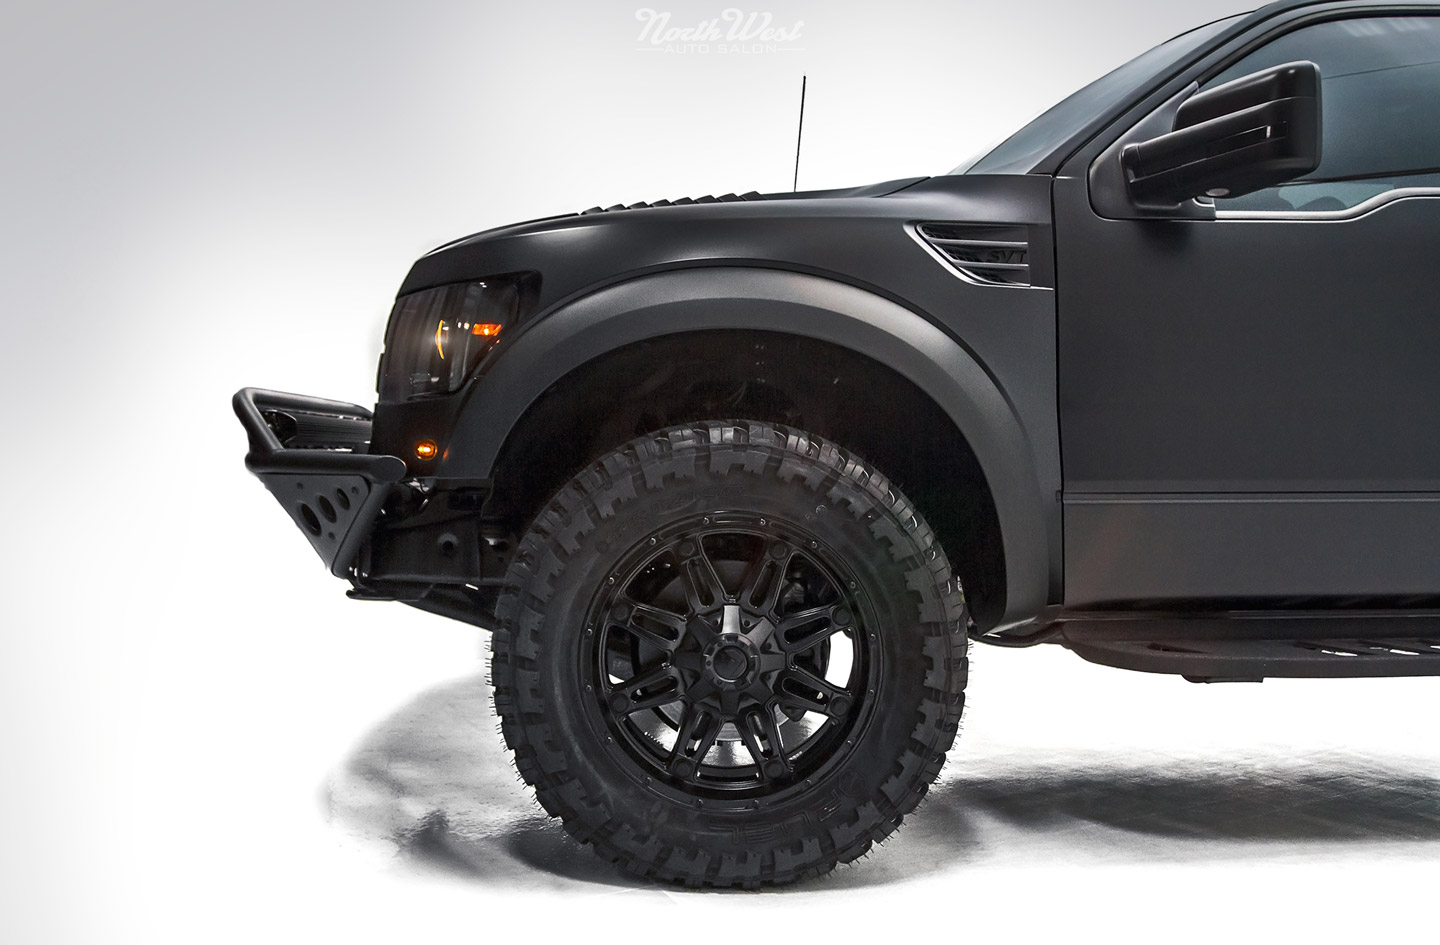 Clint-Dempsey-Sounders-Ford-Raptor-stealth-wrap-paint-protection-24